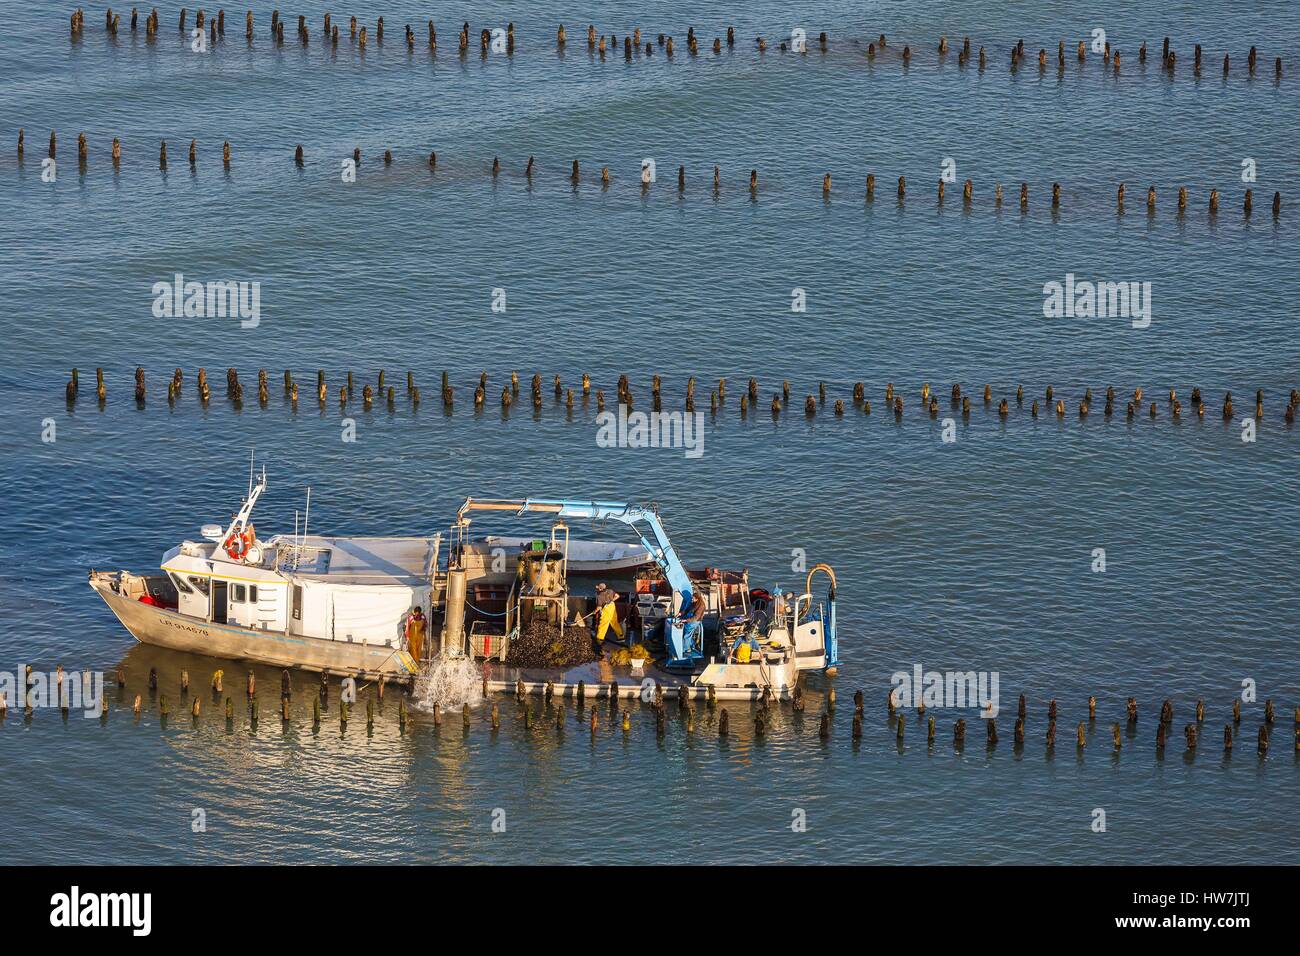 France, Vendee, La Faute sur Mer, boat collecting mussels in a bouchot mussels farm (aerial view) Stock Photo